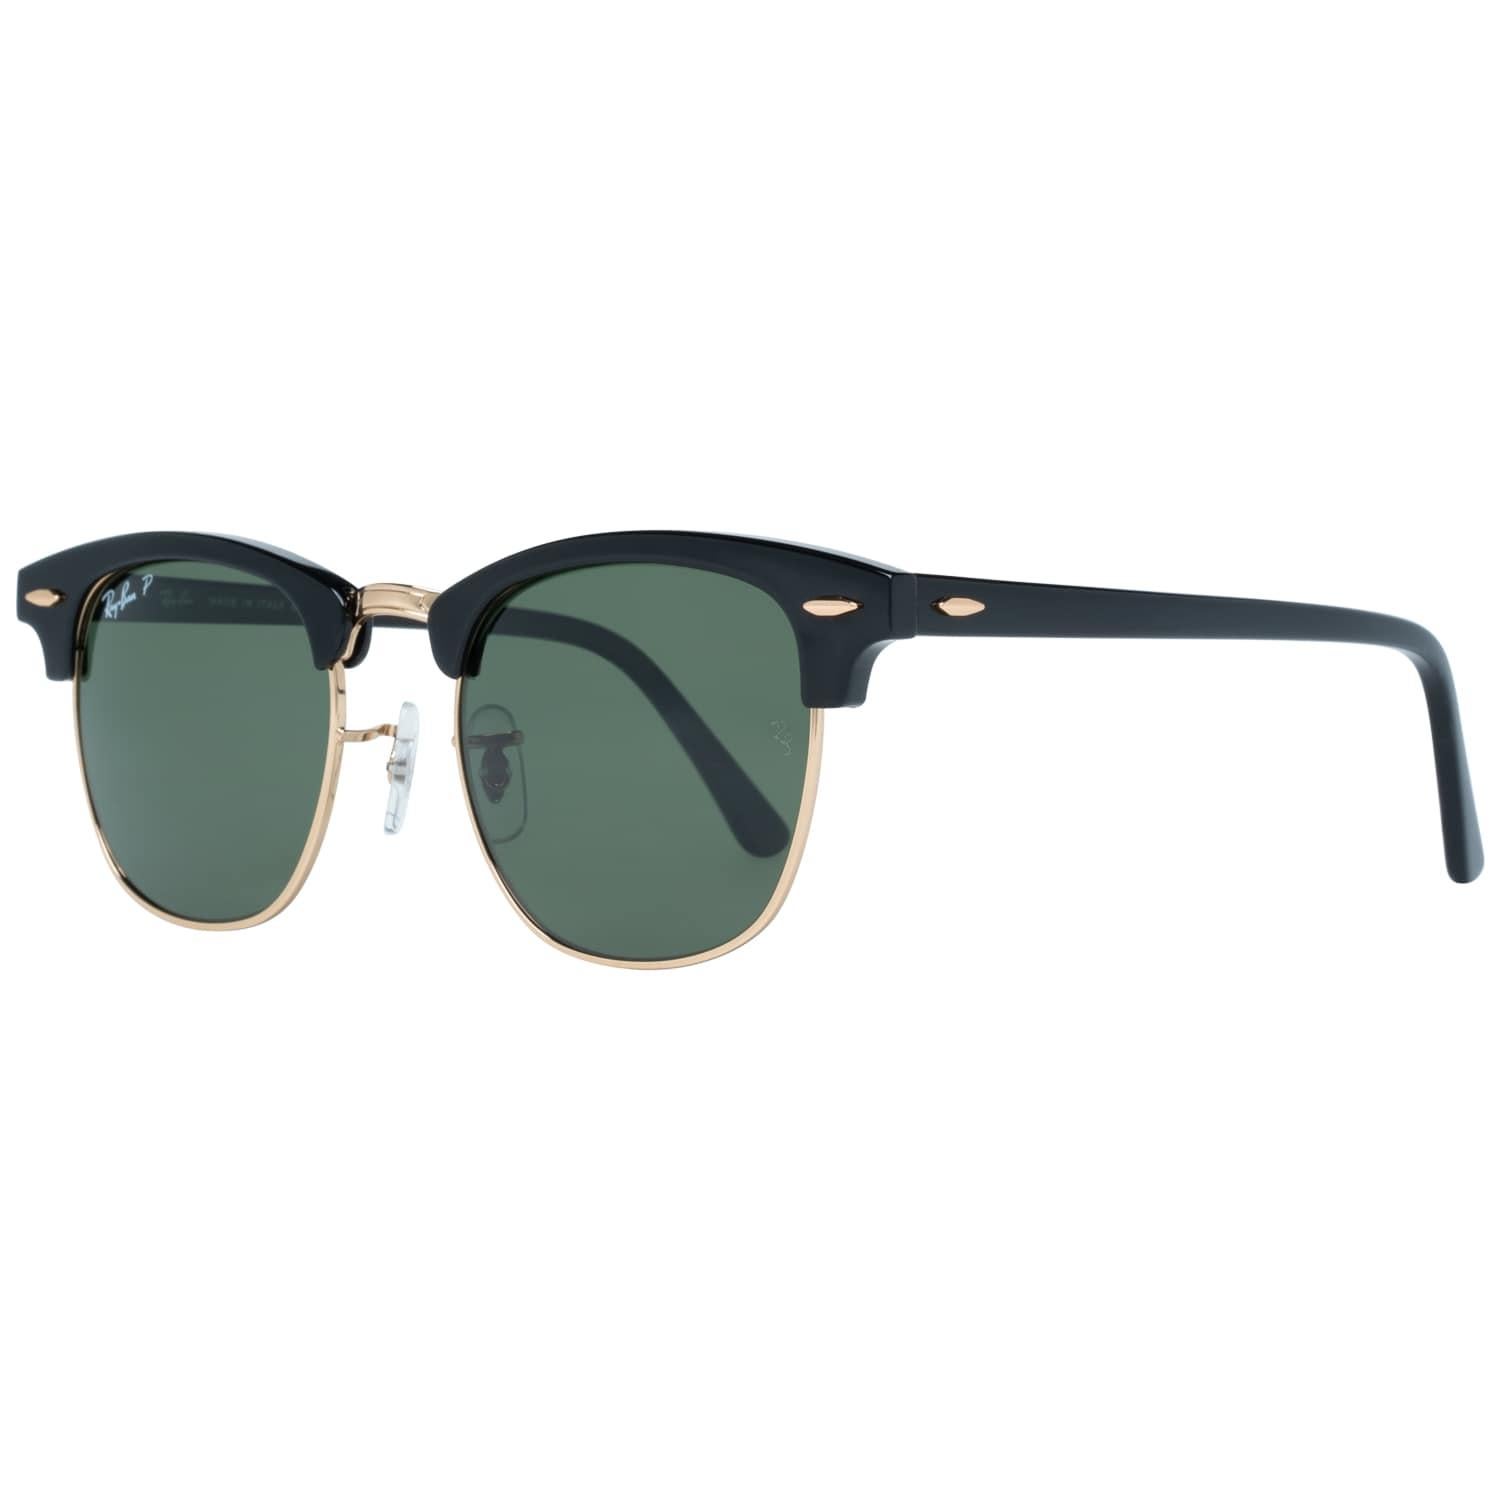 Details

MATERIAL: Metal

COLOR: Black

MODEL: RB3016 901/58 51

GENDER: Adult Unisex

COUNTRY OF MANUFACTURE: Italy

TYPE: Sunglasses

ORIGINAL CASE?: Yes

STYLE: Trapezium

OCCASION: Casual

FEATURES: Lightweight

LENS COLOR: Green

LENS